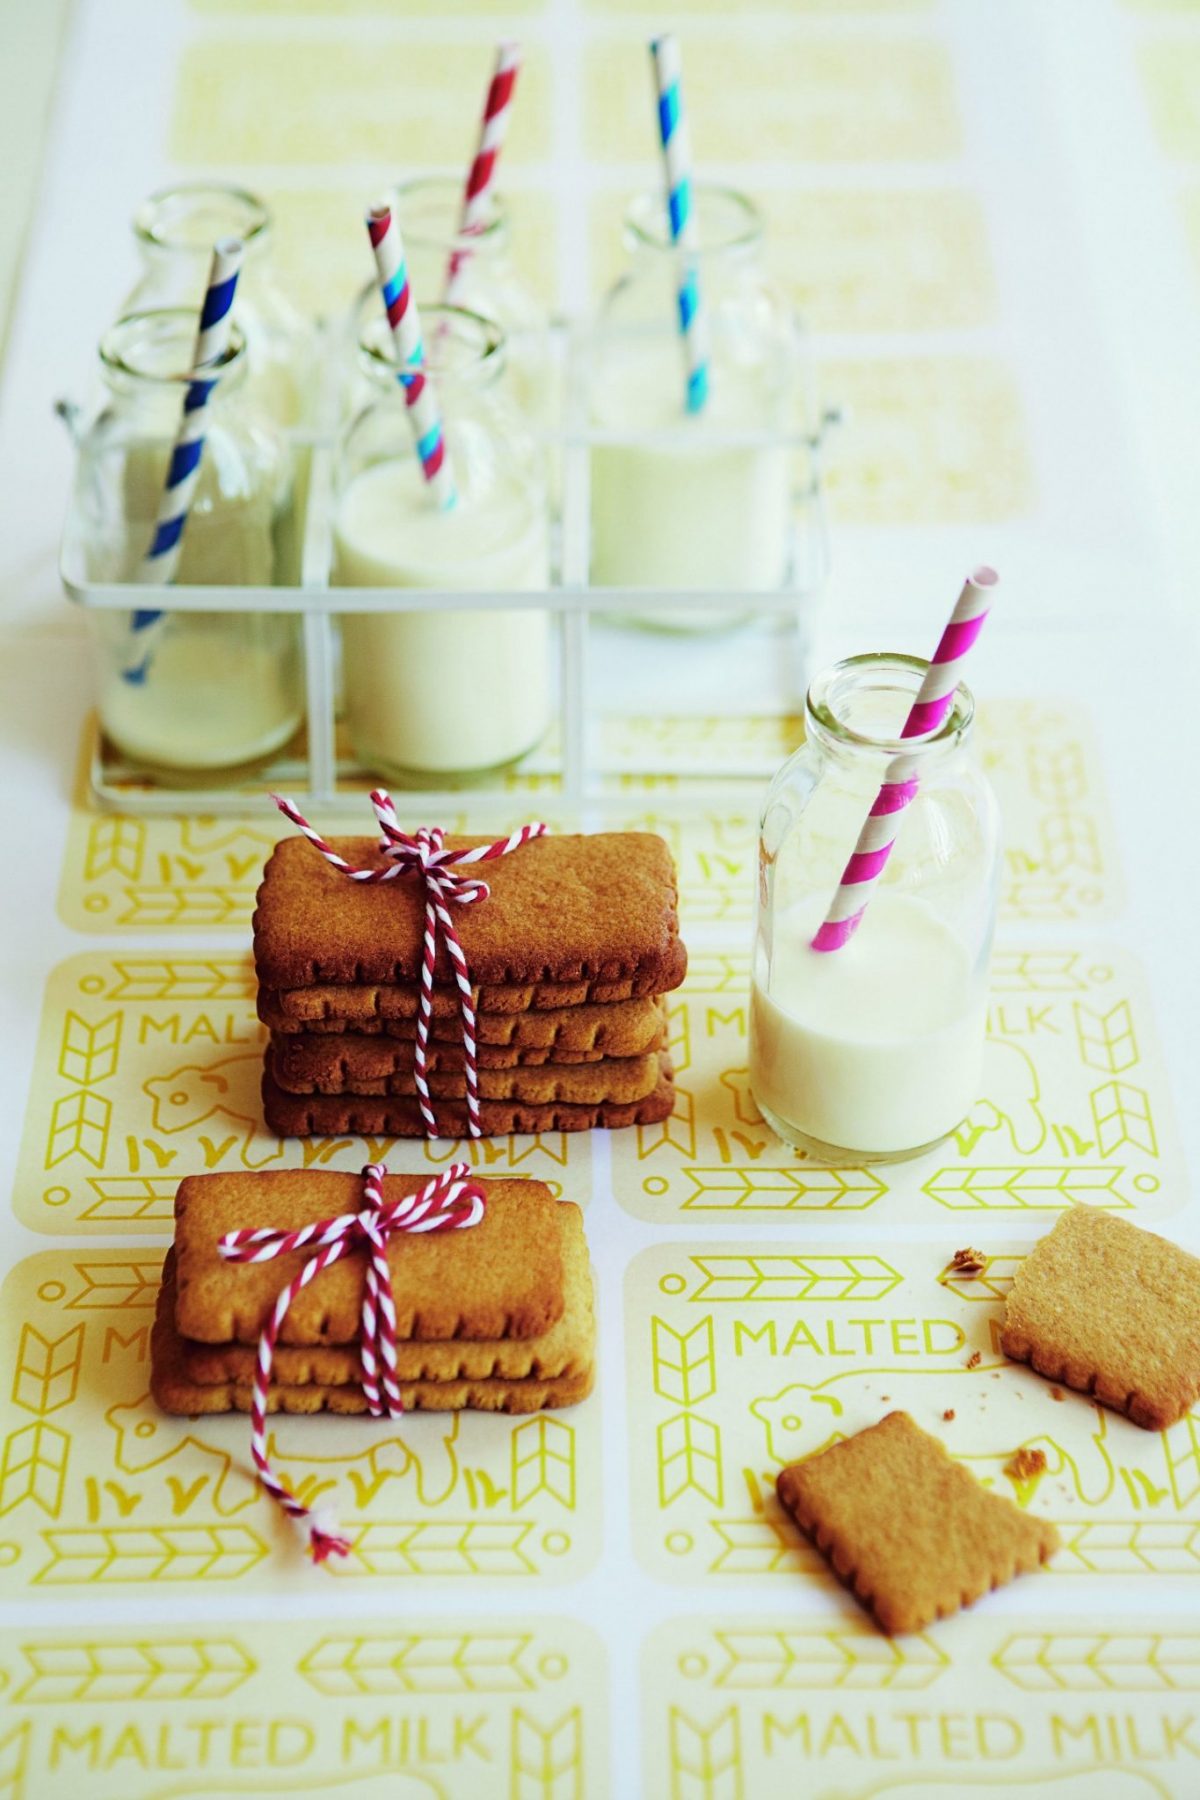 Homemade malted milk biscuits